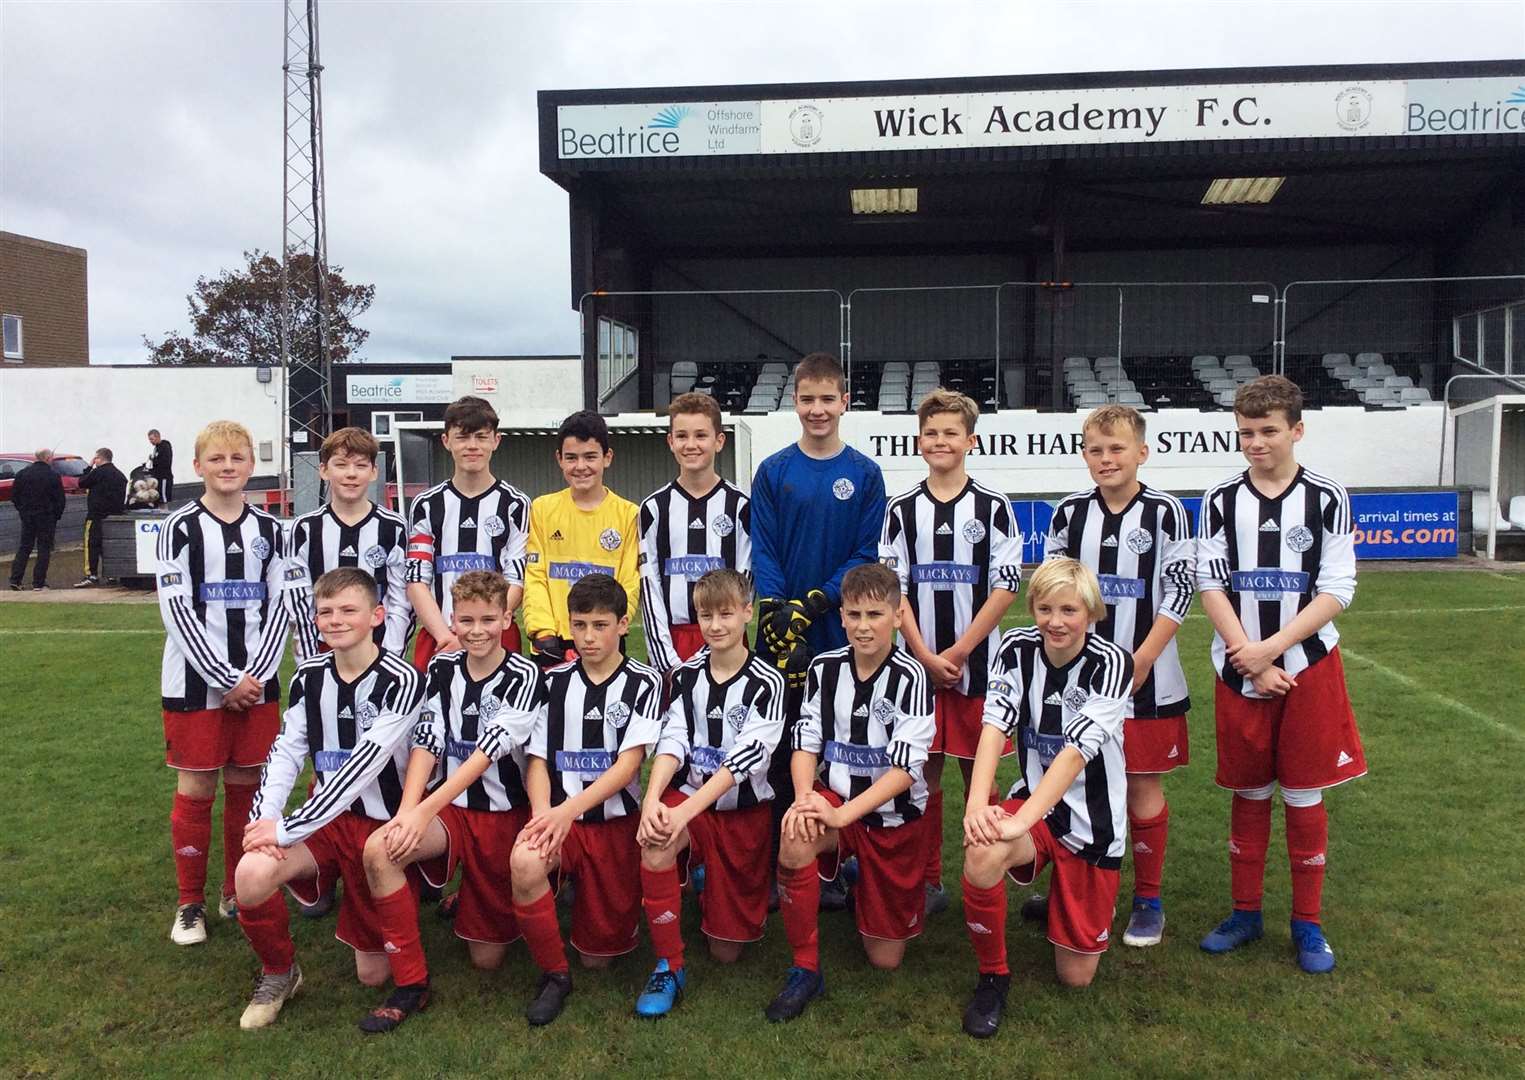 The Wick Academy under-15s who defeated Clach 6-0 at Harmsworth Park.